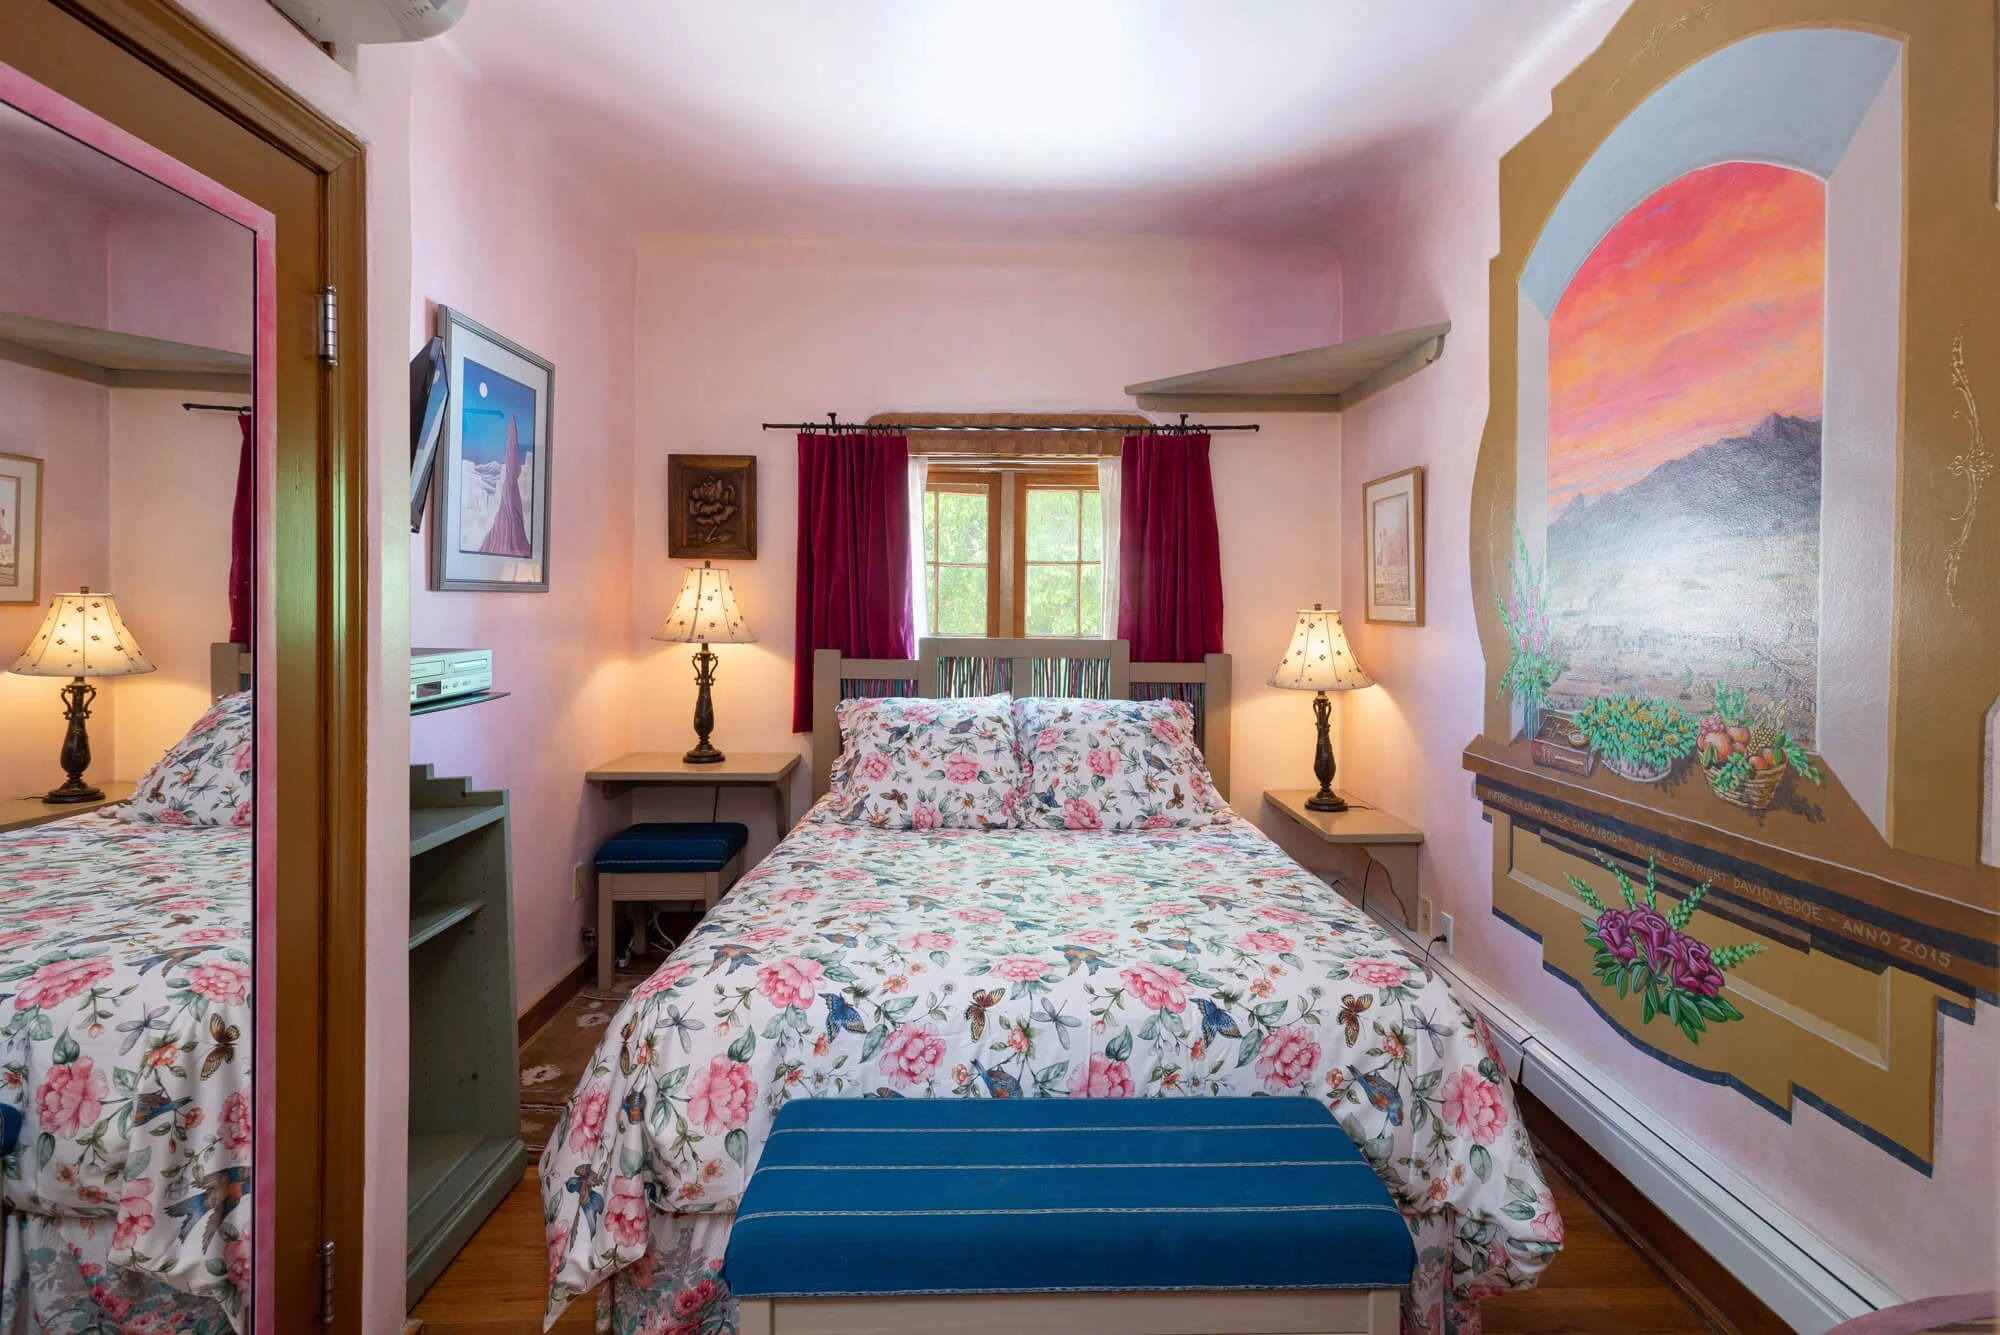 Queen bed with floral comforter and mural on the wall